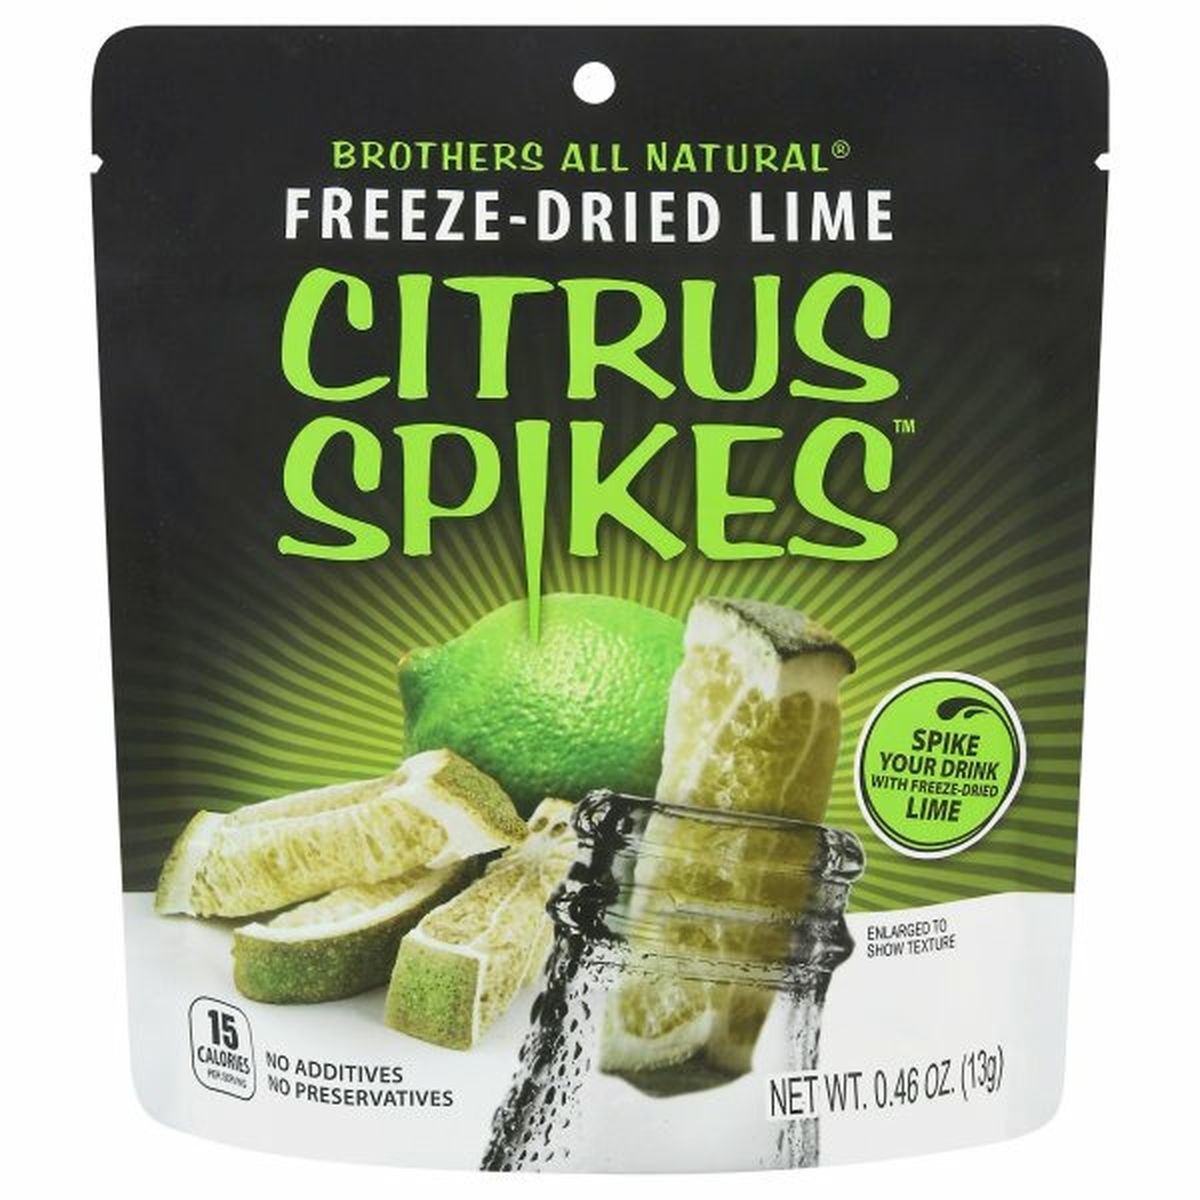 Calories in Brothers All Natural Citrus Spikes Lime, Freeze-Dried